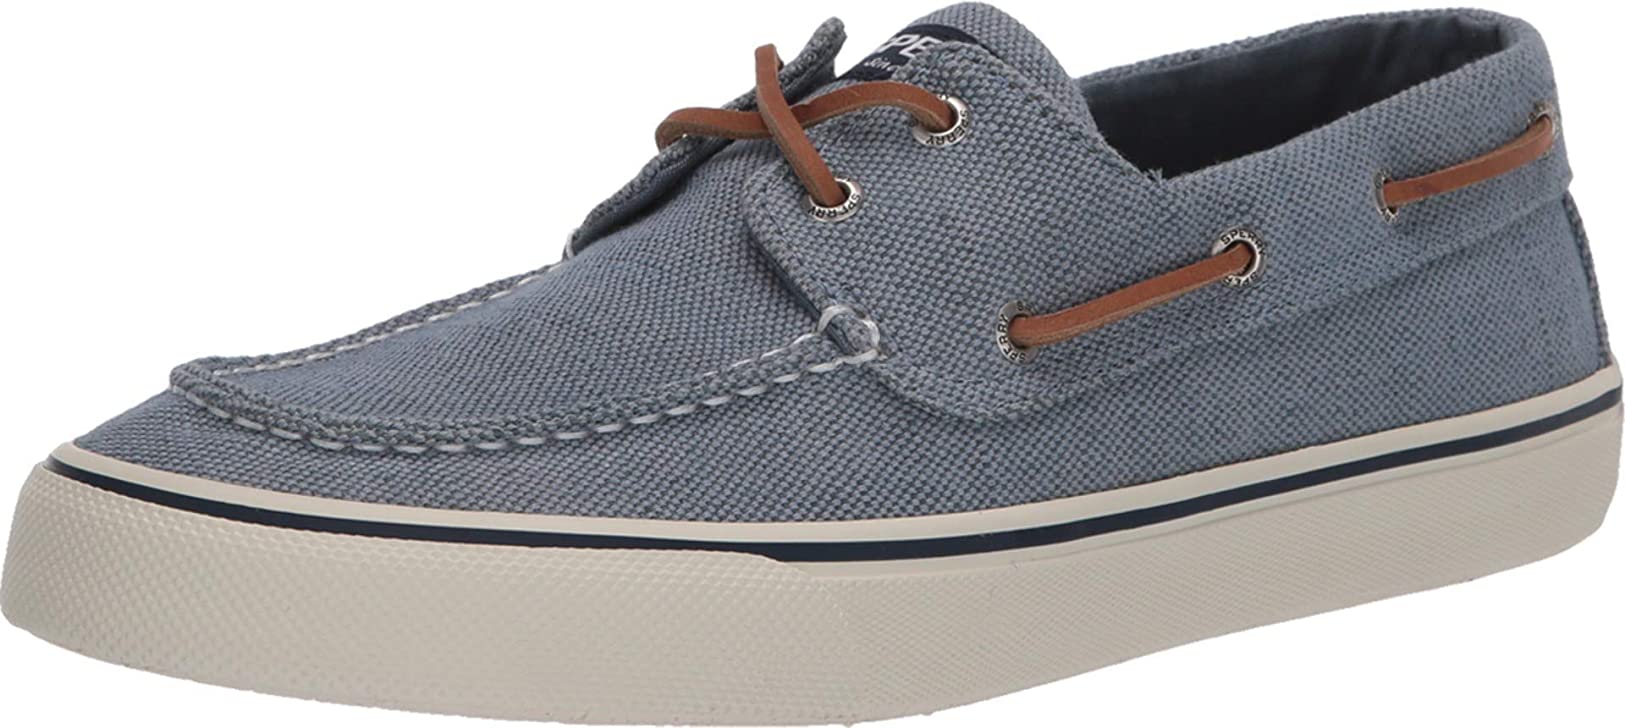 Sperry Mens Bahama II Distressed Boat Shoe - Blue - Size 12